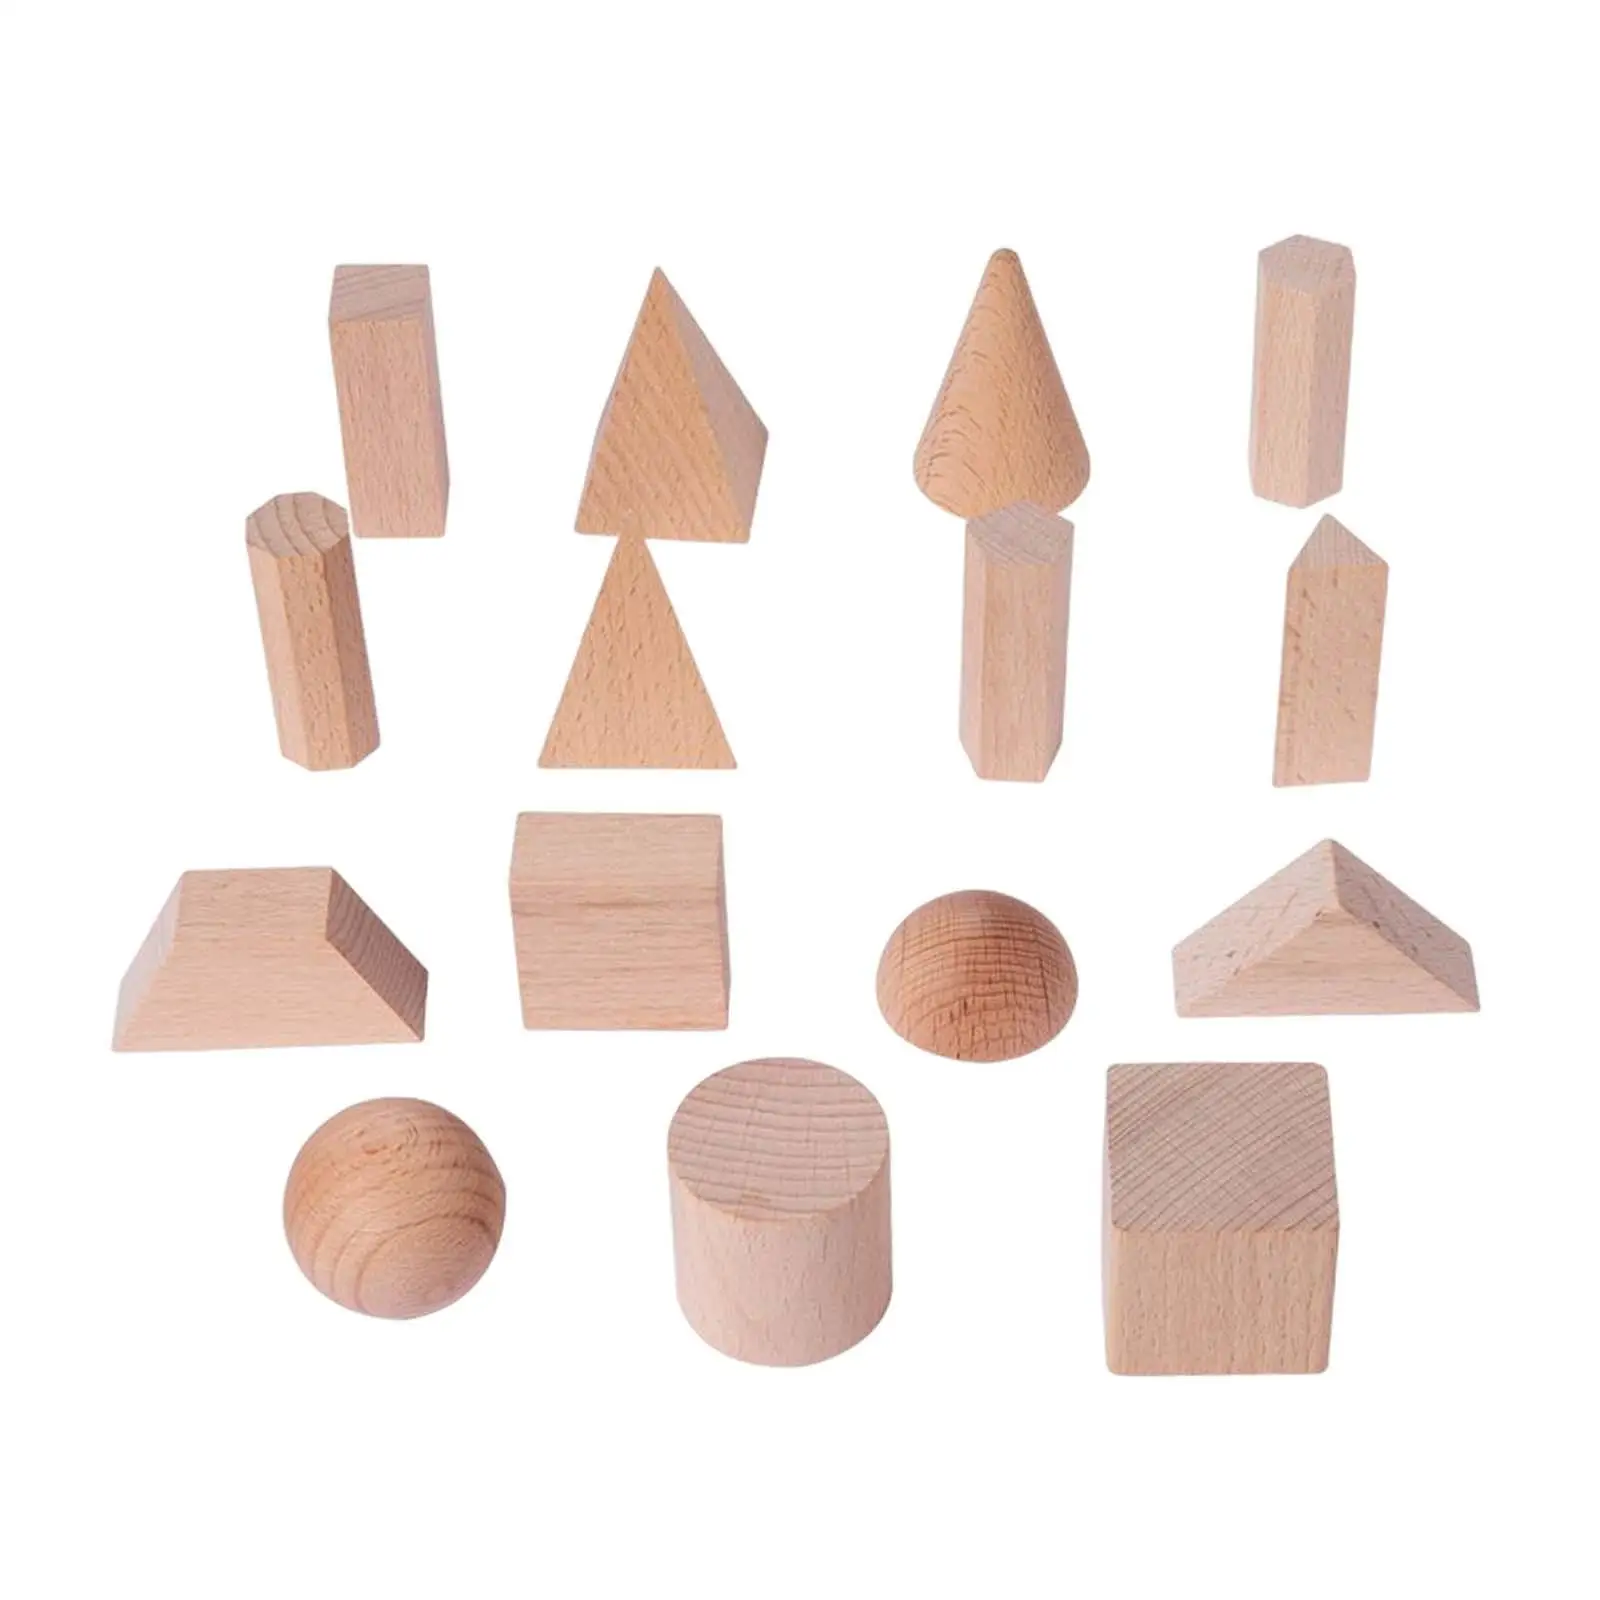 15x Wood Geometric Solids Learning Education Math Toys Shape Sorter Stacking Toy Montessori Toys for Kids Toddler Ages 2+